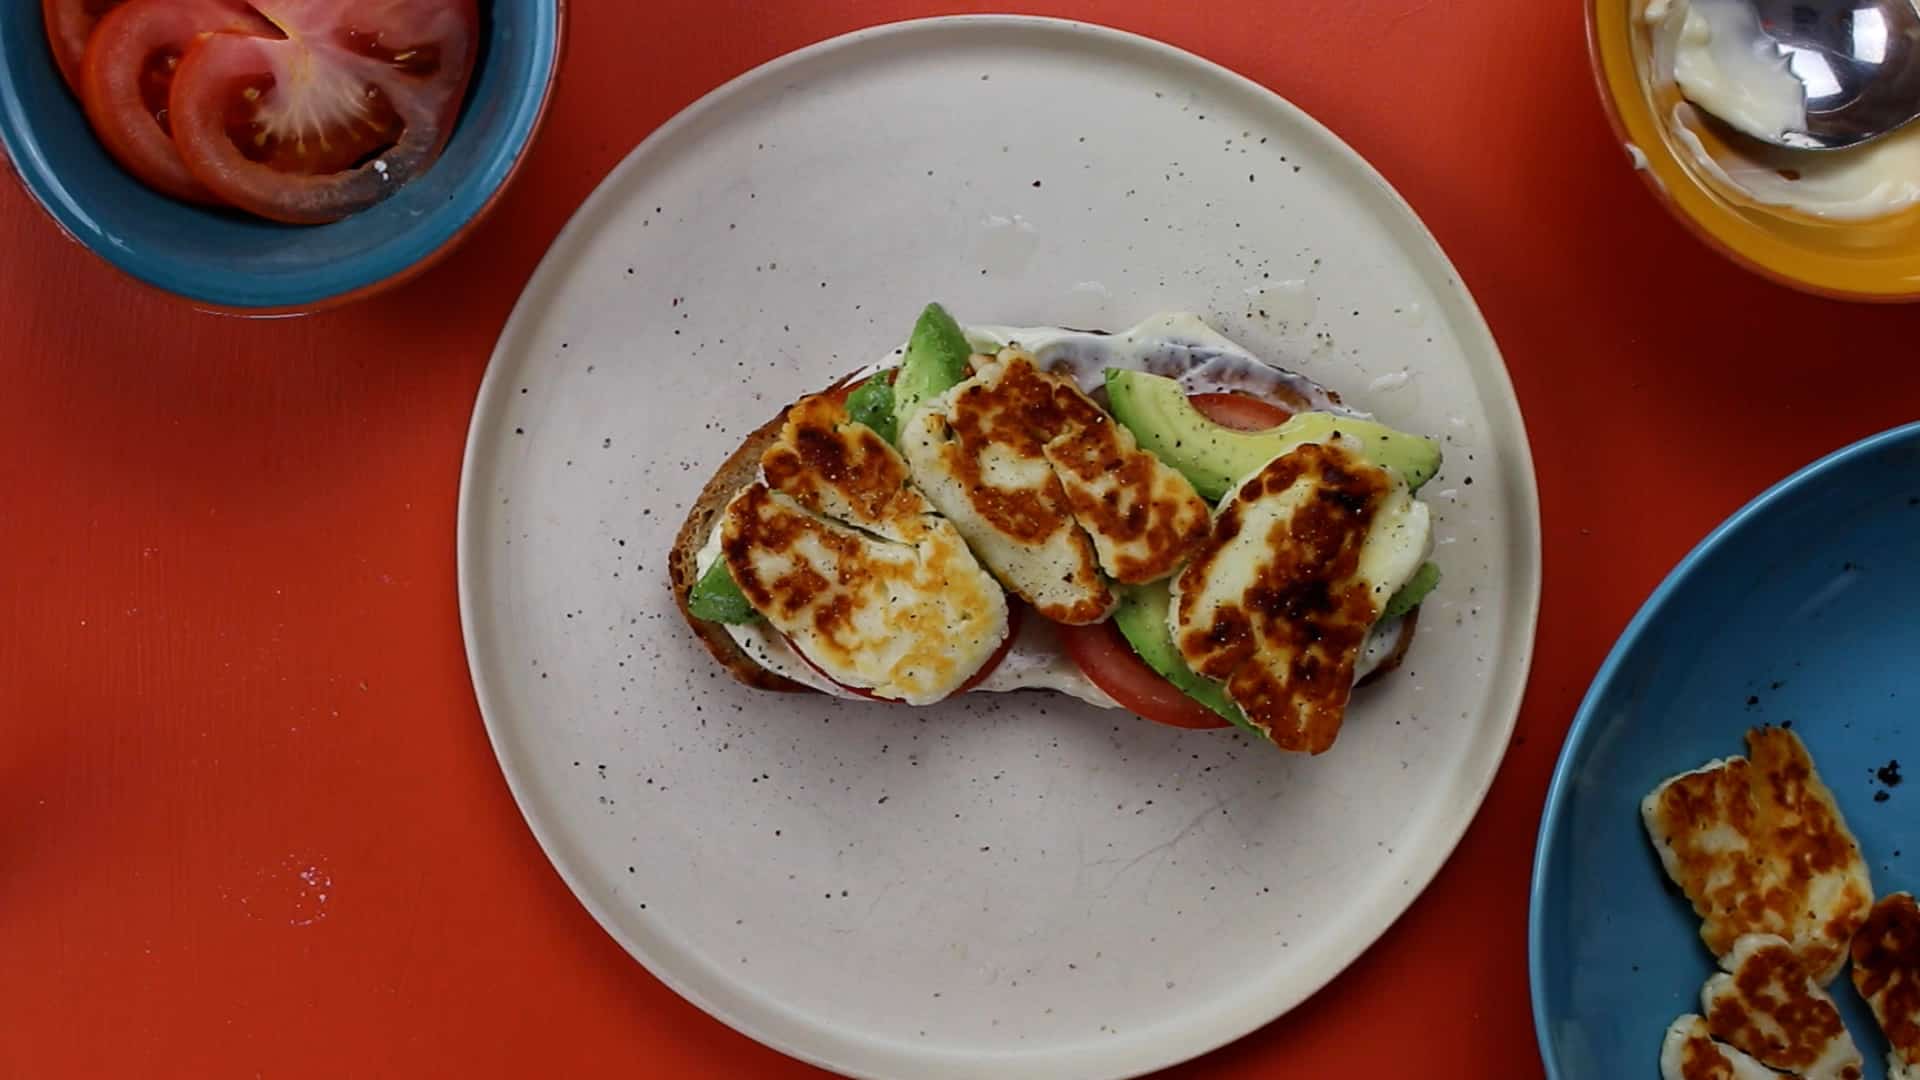 Avocado, tomato, mayonnaise and halloumi on a piece of sourdough on a plate with tomatoes, halloumi and mayonnaise in separate bowls.